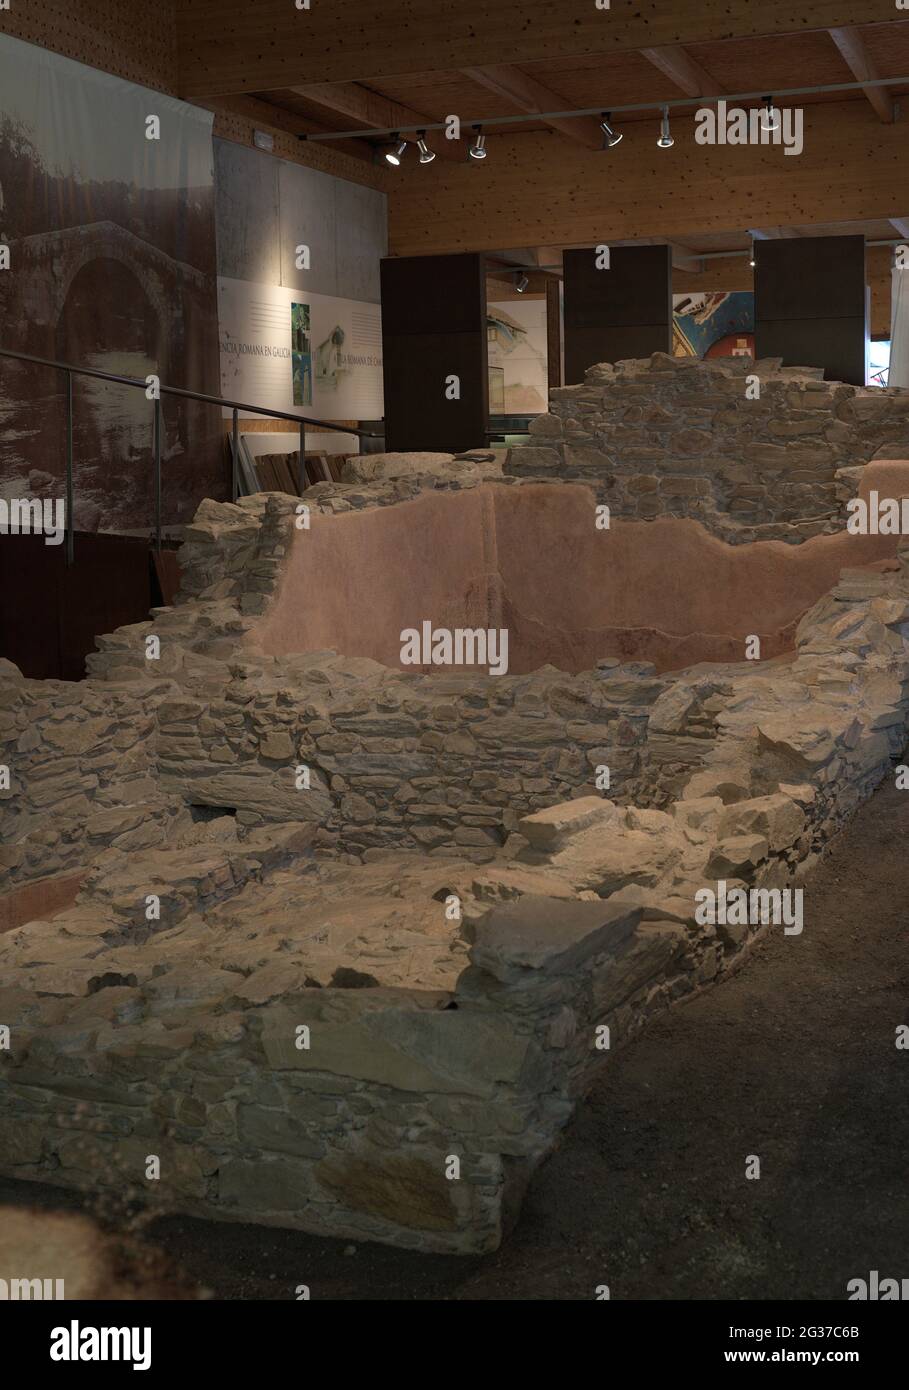 Spain, Galicia, La Coruña province. Archaeological Museum of Cambre. Roman Villa of Cambre. Dated between the 2nd and 4th centuries AD. View of the archaeological remains. Stock Photo